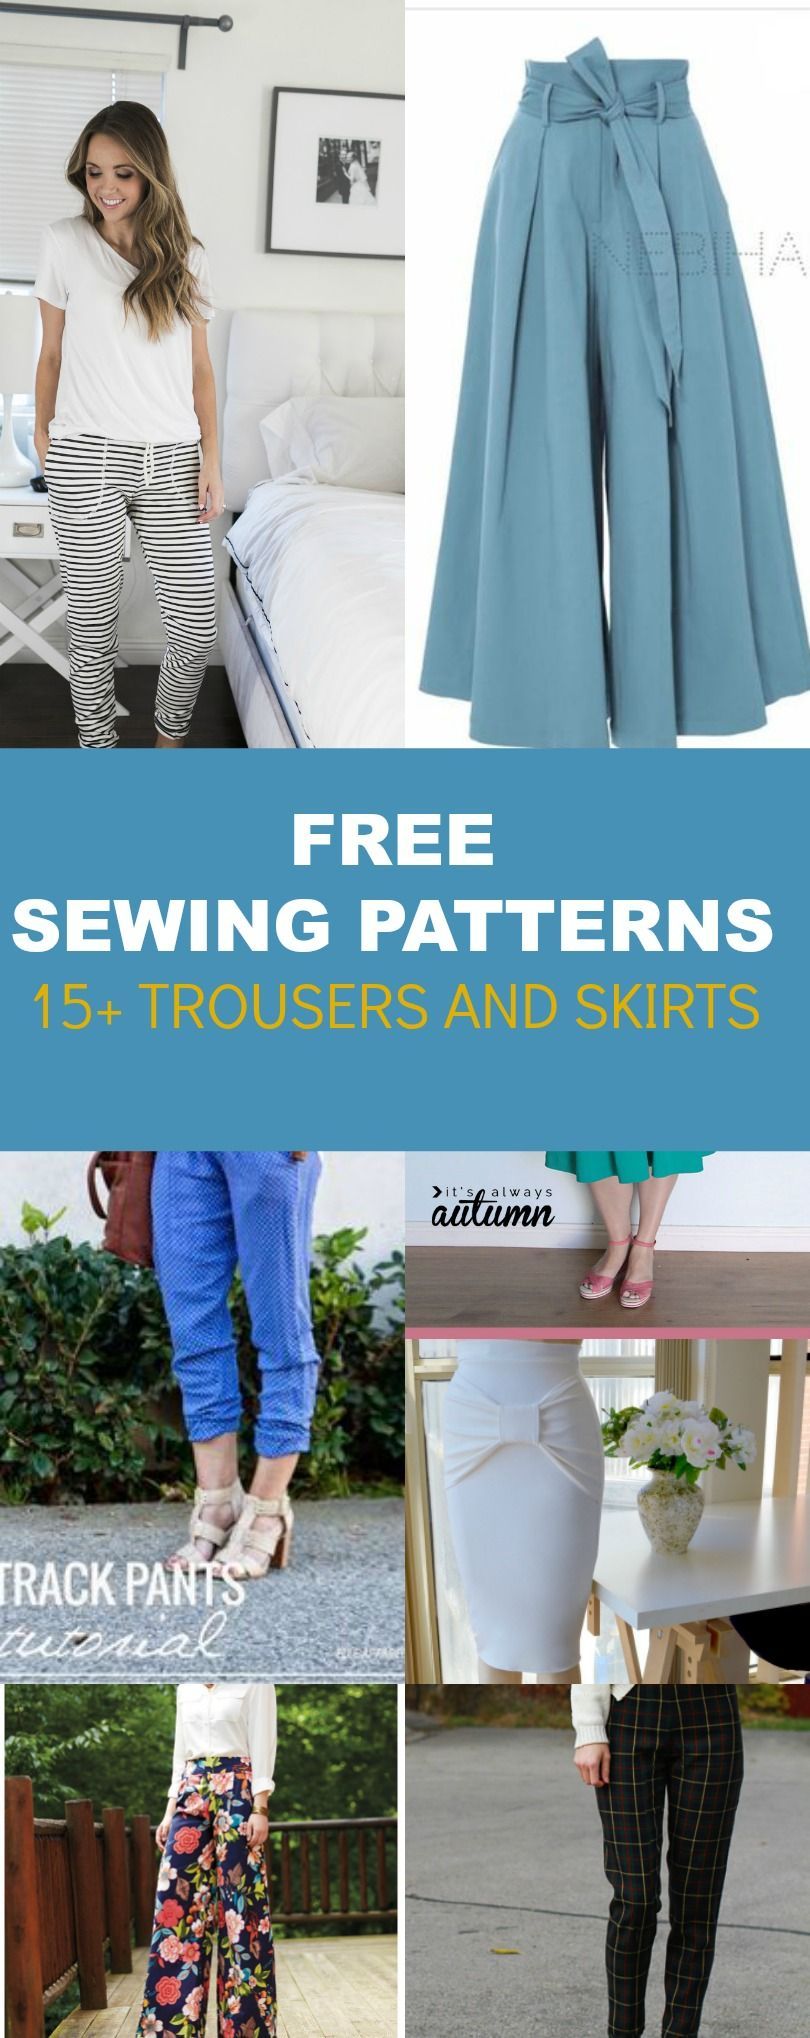 FREE PATTERN ALERT: 15+ Pants and Skirts Sewing Tutorials -   12 DIY Clothes Patterns free printable ideas